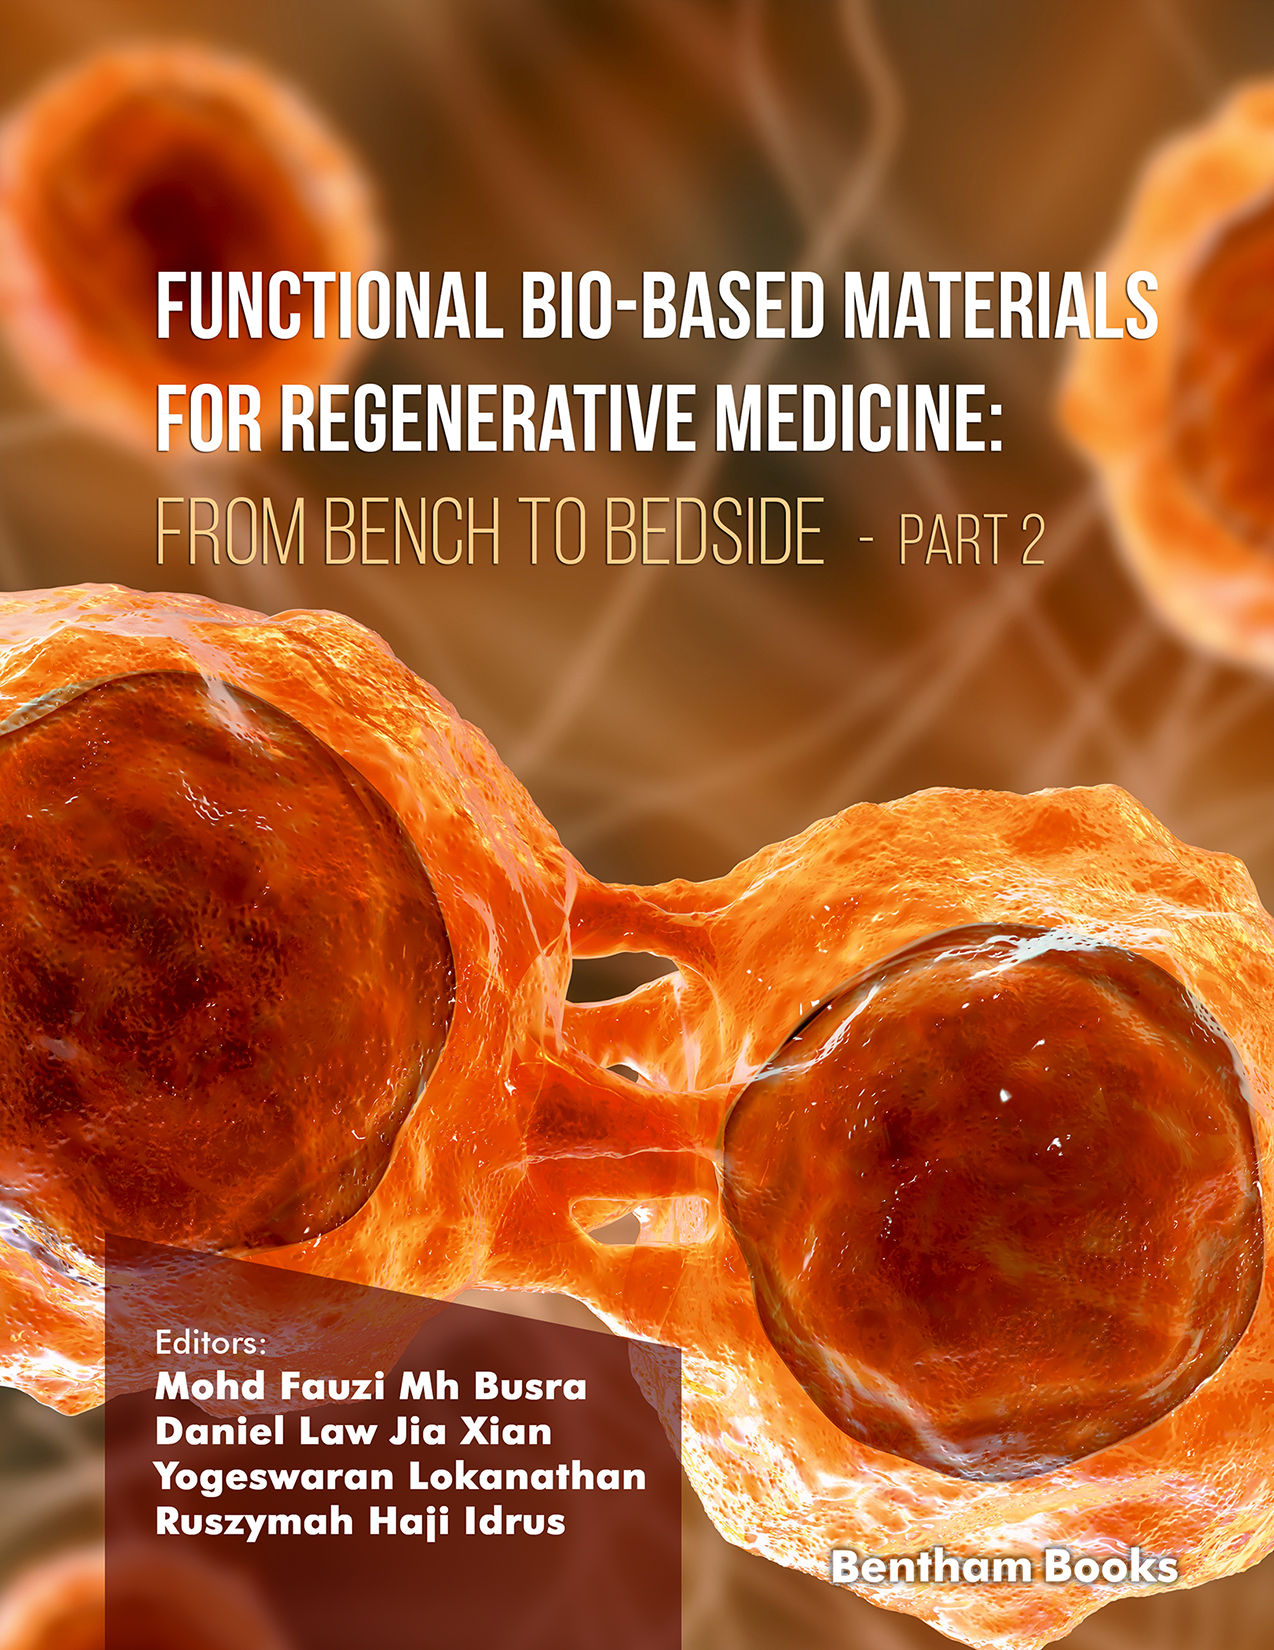 Functional Bio-based Materials for Regenerative Medicine: From Bench to Bedside (Part 2)